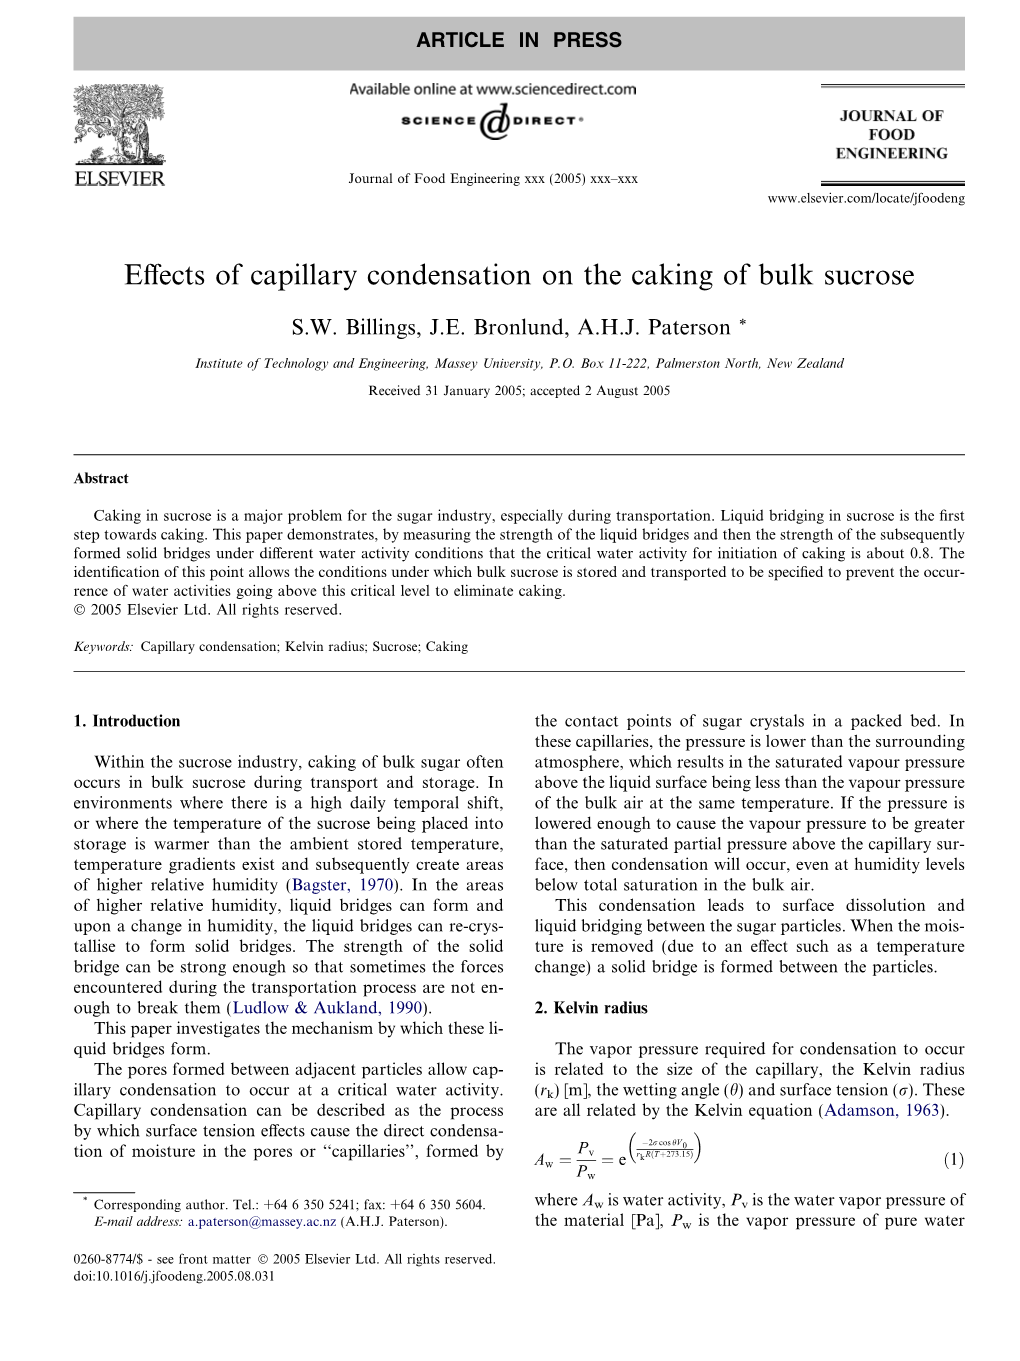 Effects of Capillary Condensation on the Caking of Bulk Sucrose